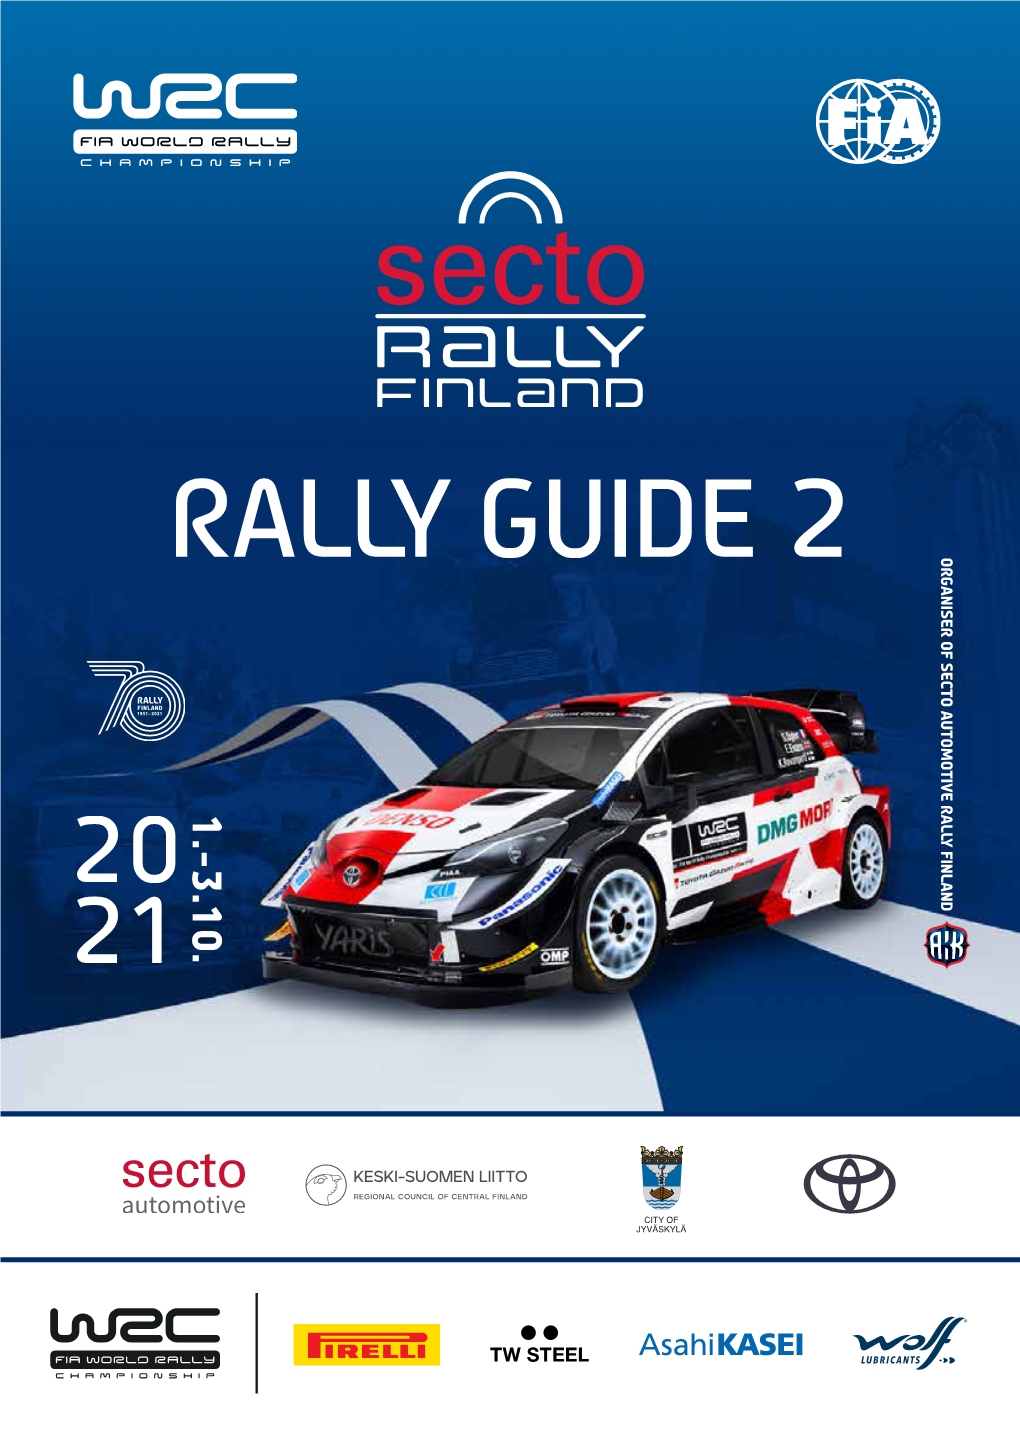 Rally Guide 2 - Contents